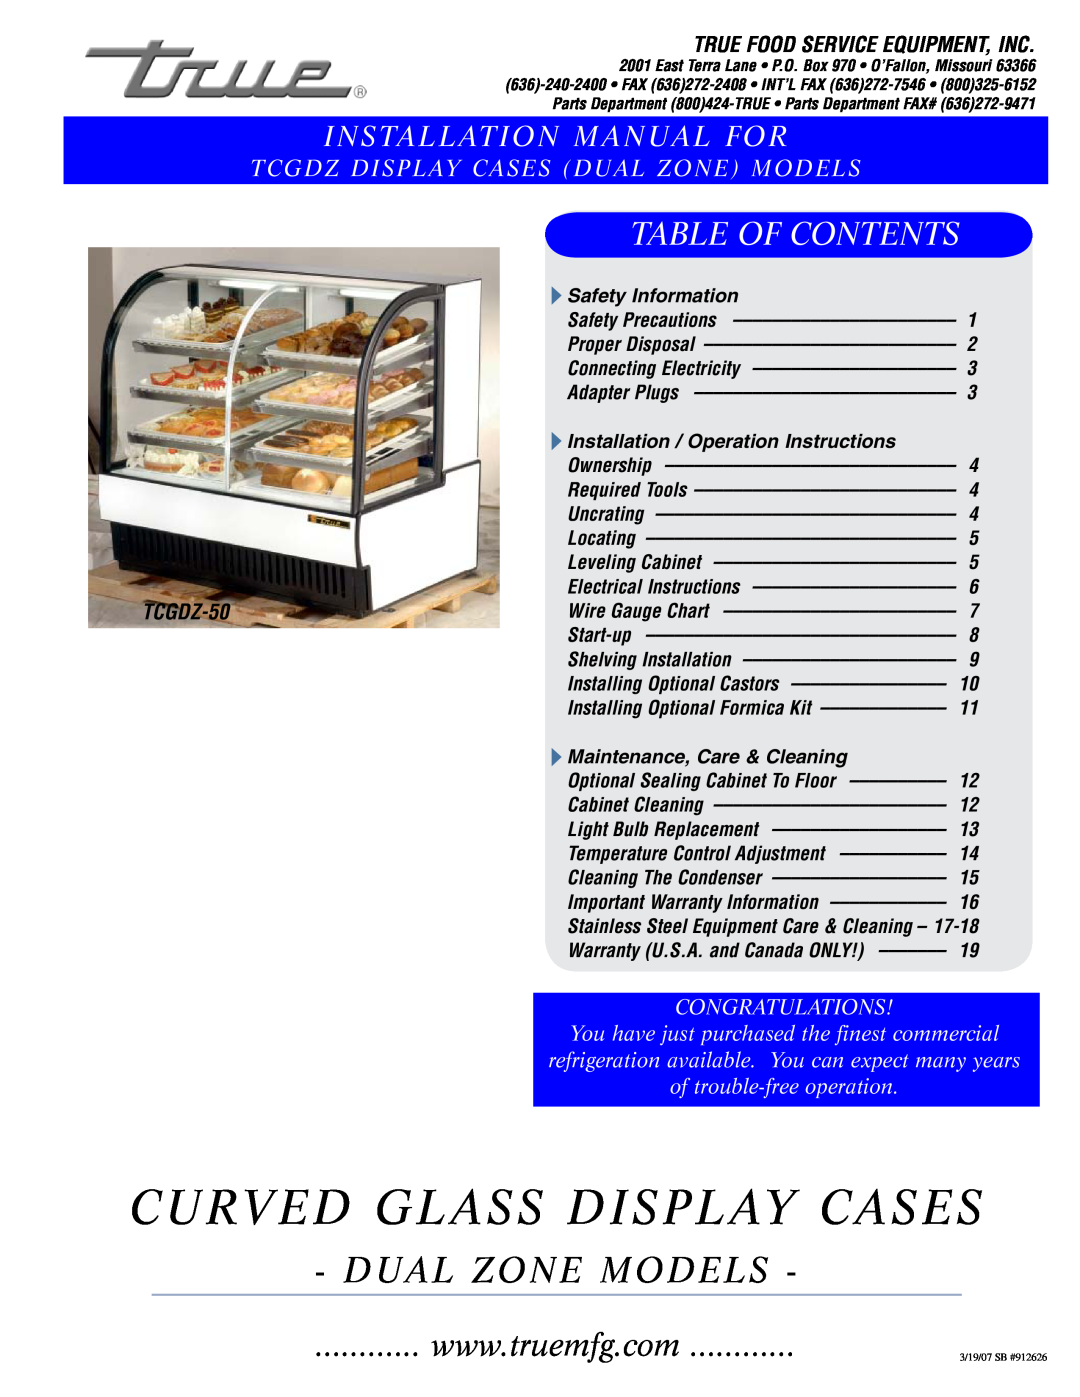 True Manufacturing Company TCGDZ-50 installation manual True Food Service Equipment, Inc, Curved Glass Display Cases 